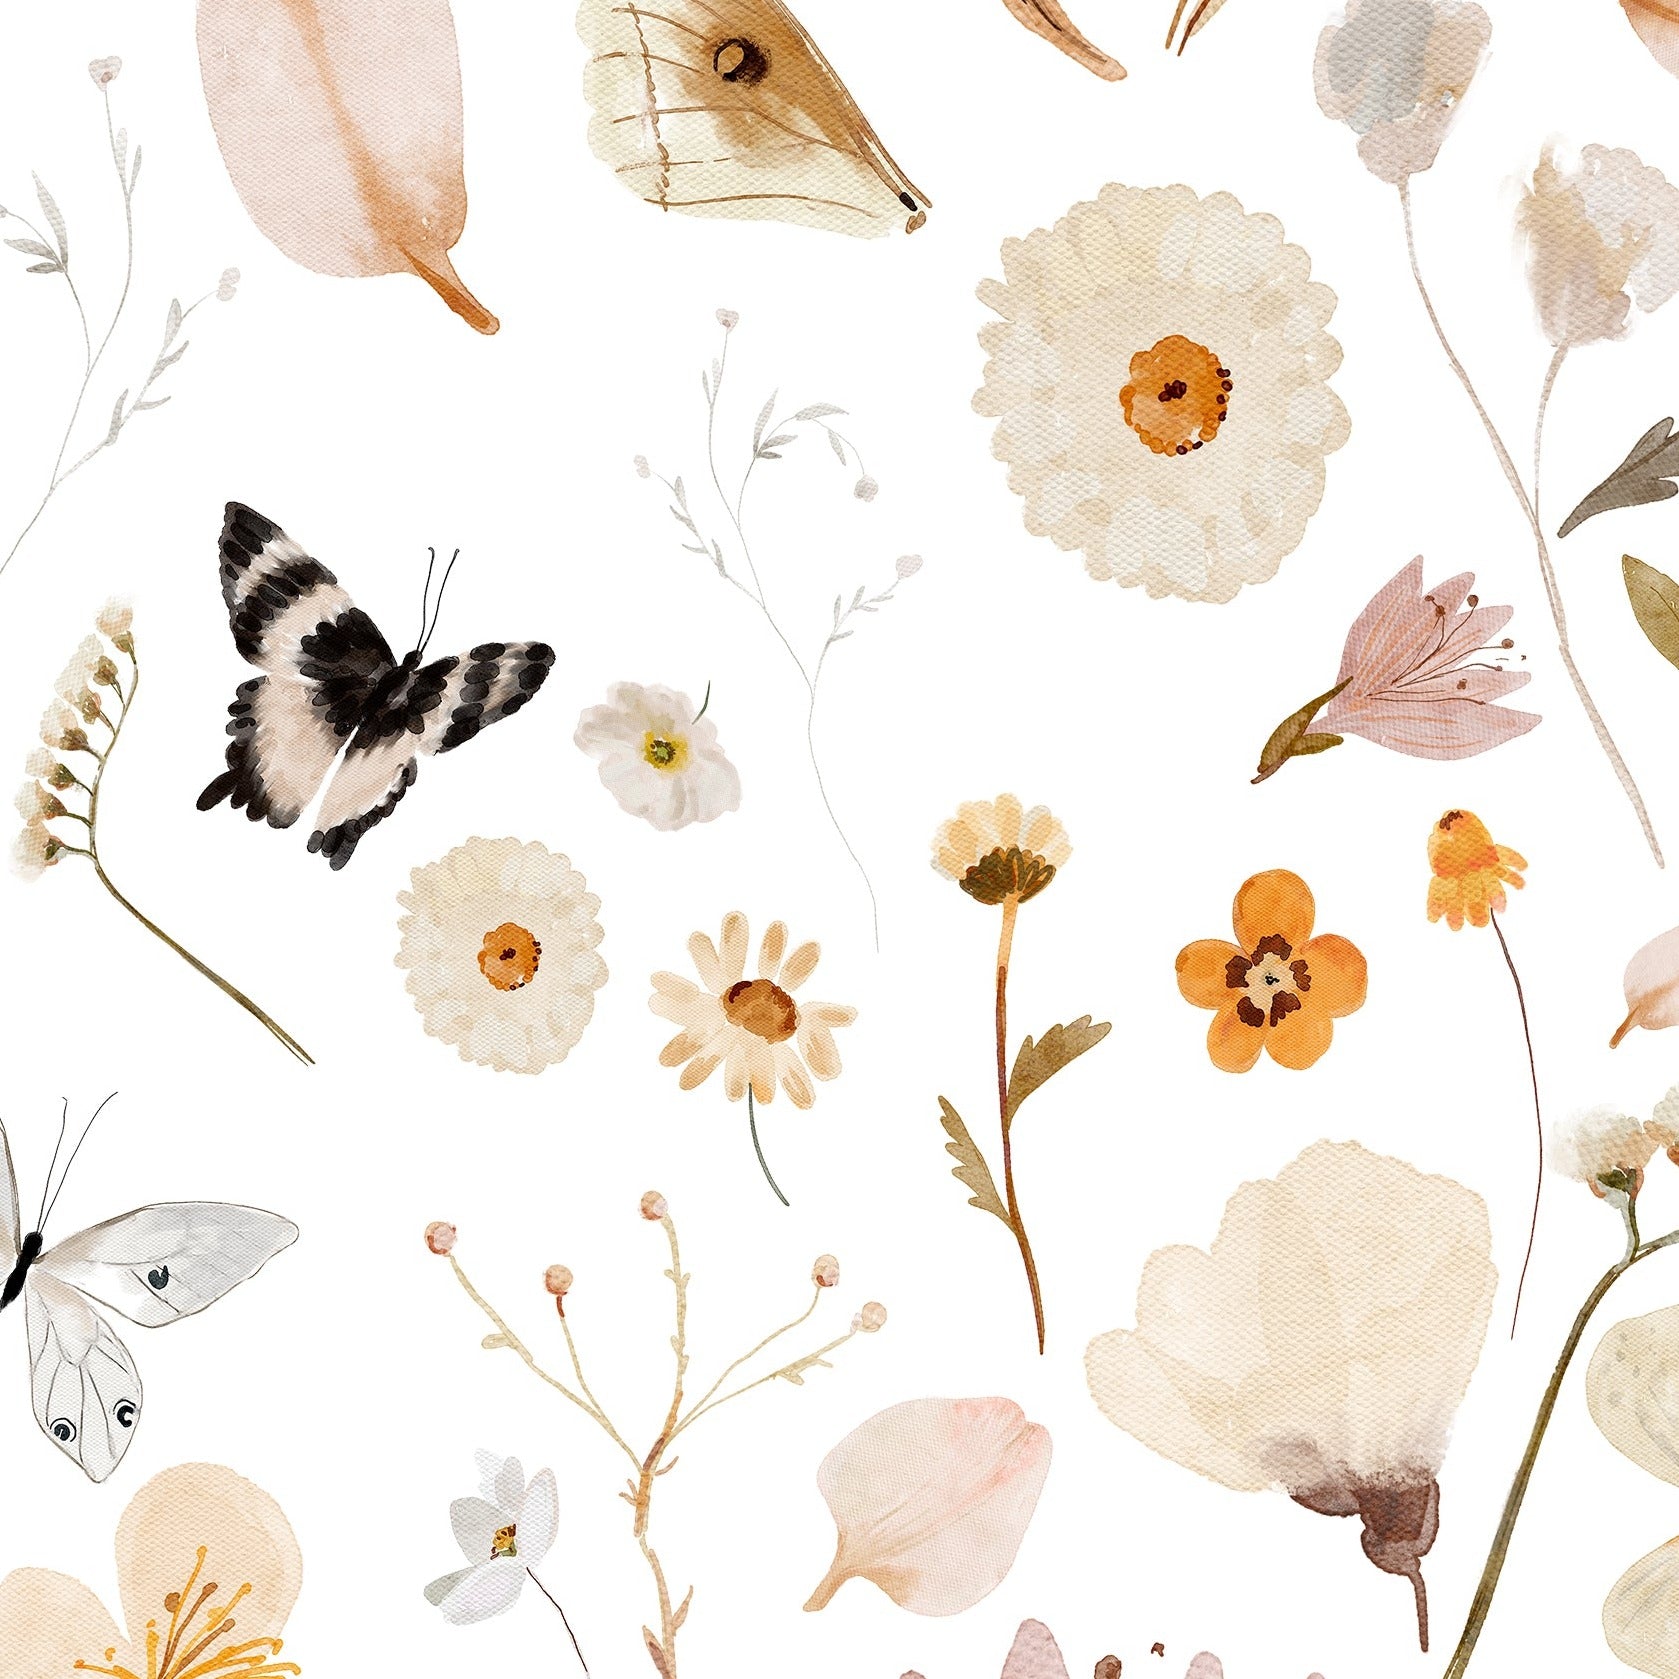 Close-up view of the Boho Garden Wallpaper - 25", featuring an intricate design of various botanical elements like flowers, leaves, and butterflies in warm pastel colors. This detailed pattern exudes a tranquil and natural charm.